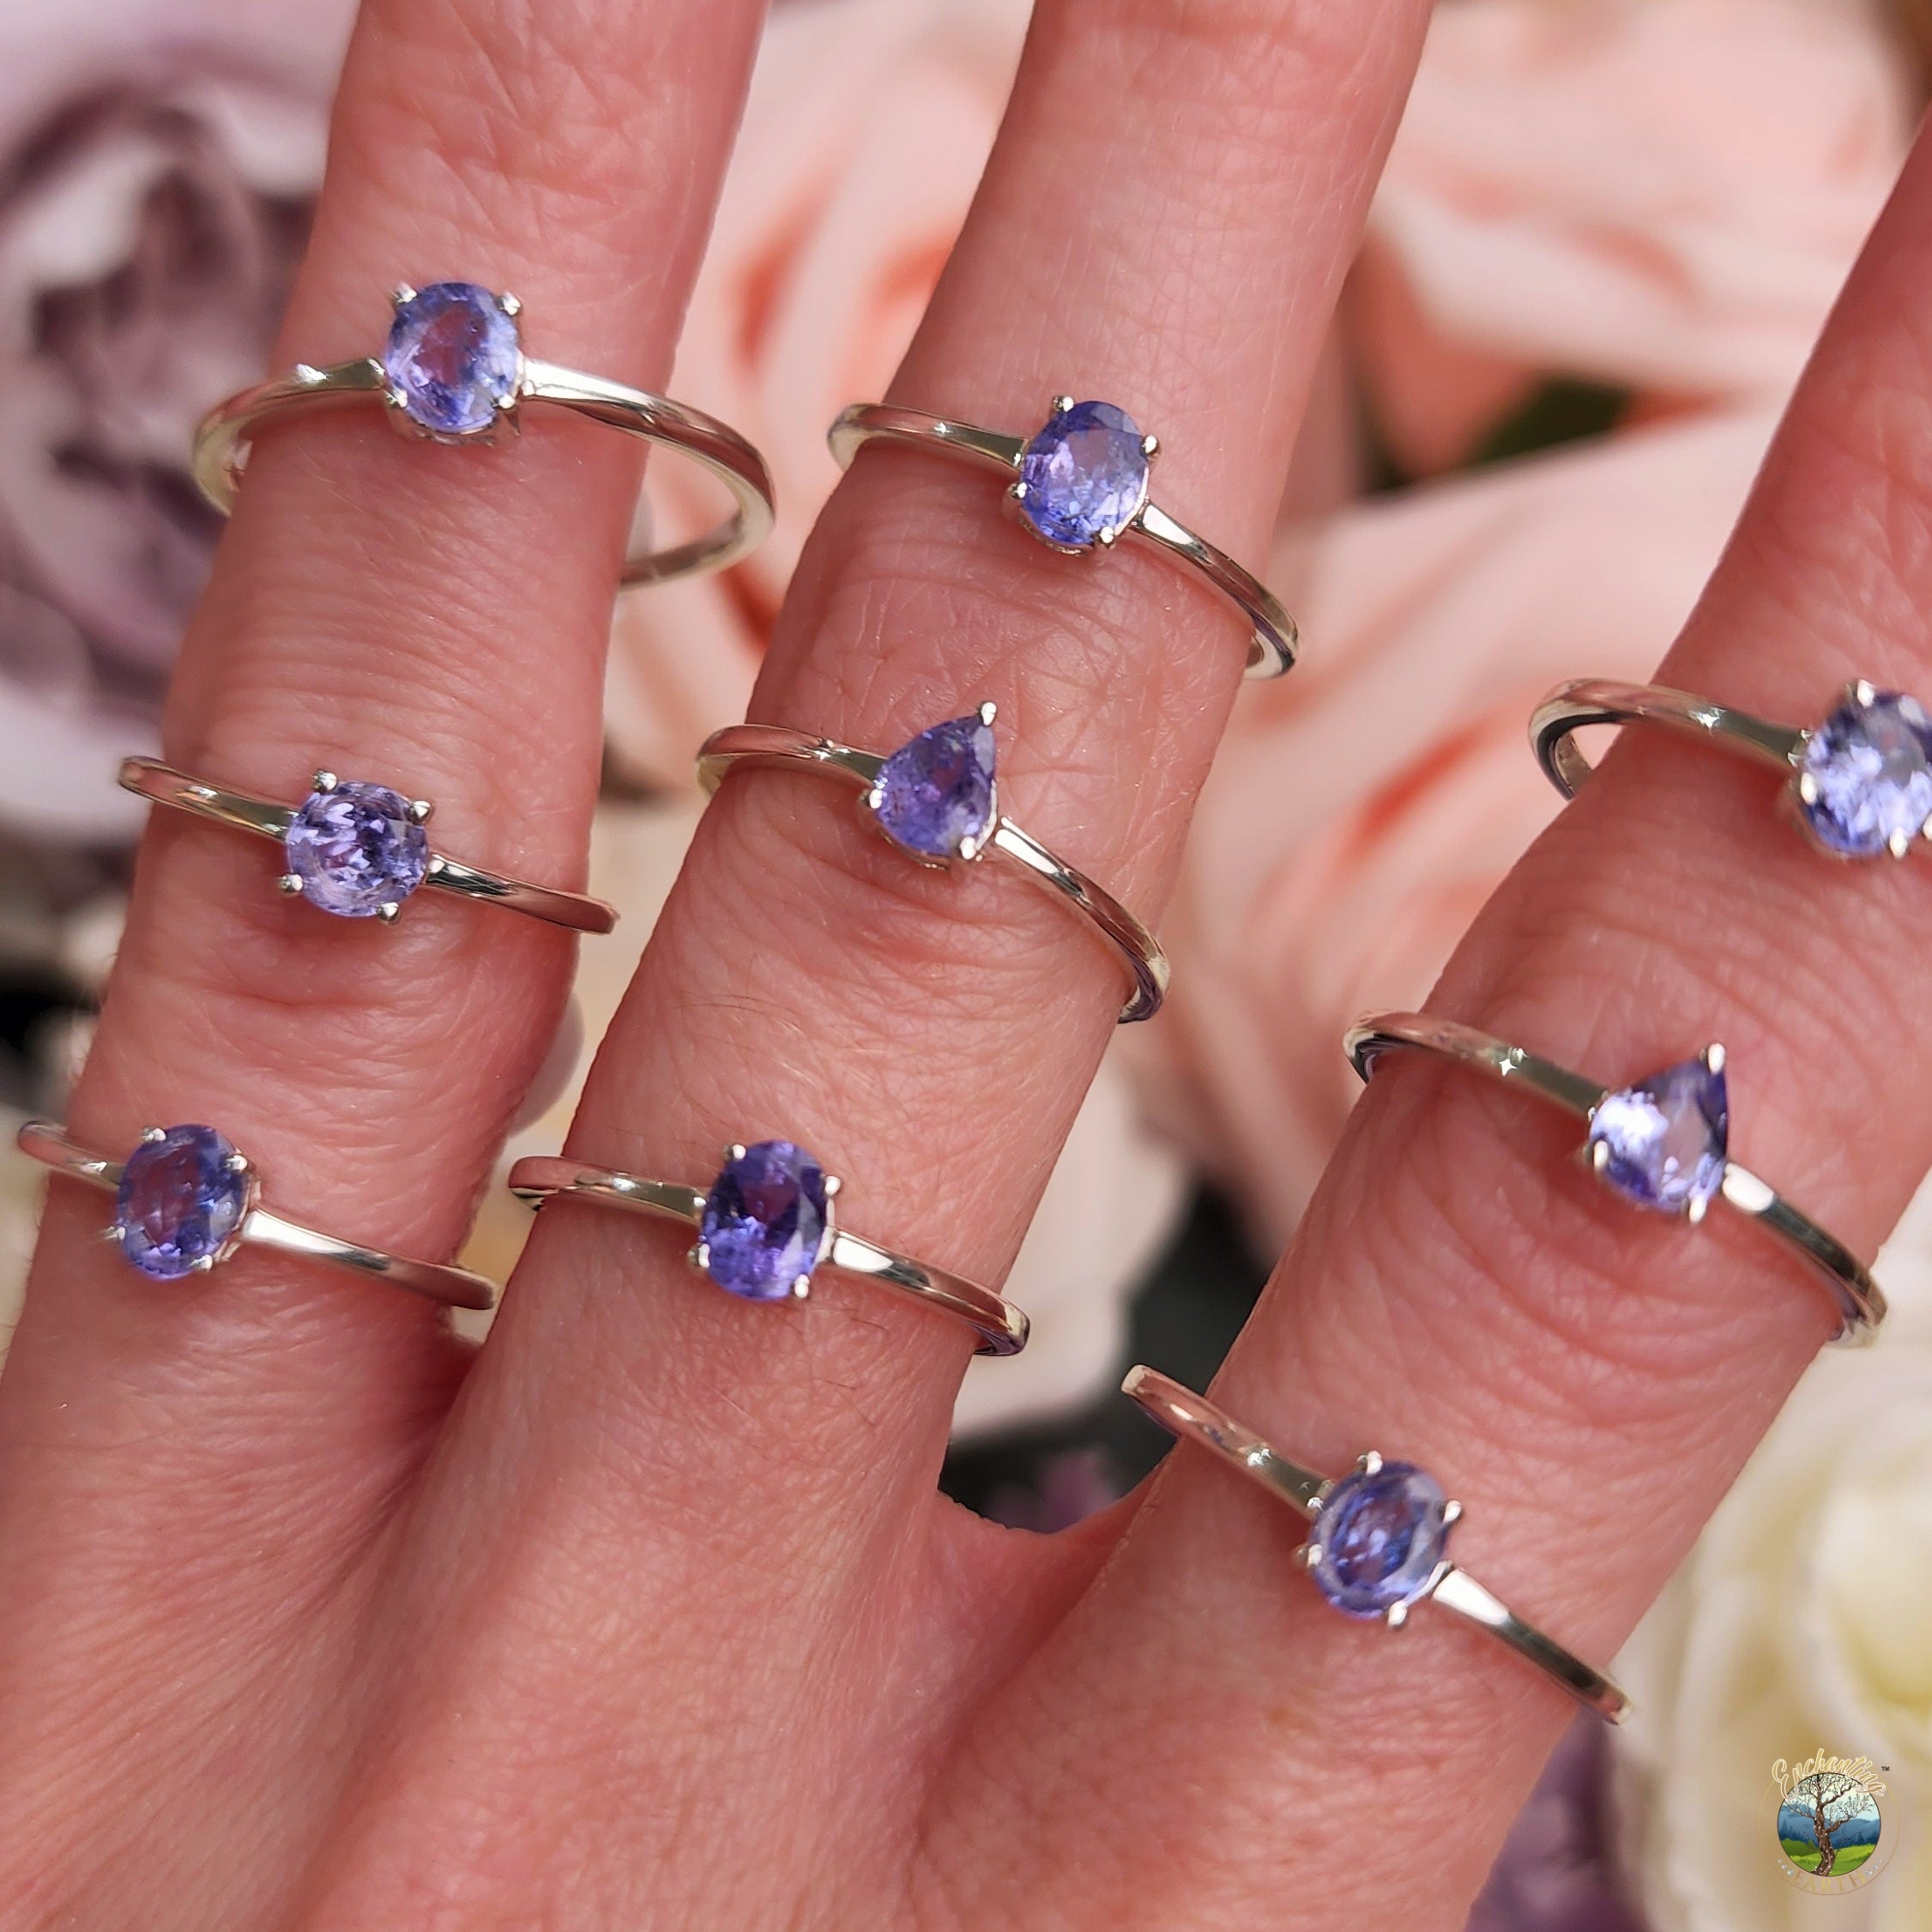 Tanzanite Dainty Ring .925 Silver for Compassion, Intuition & Raising your Vibration